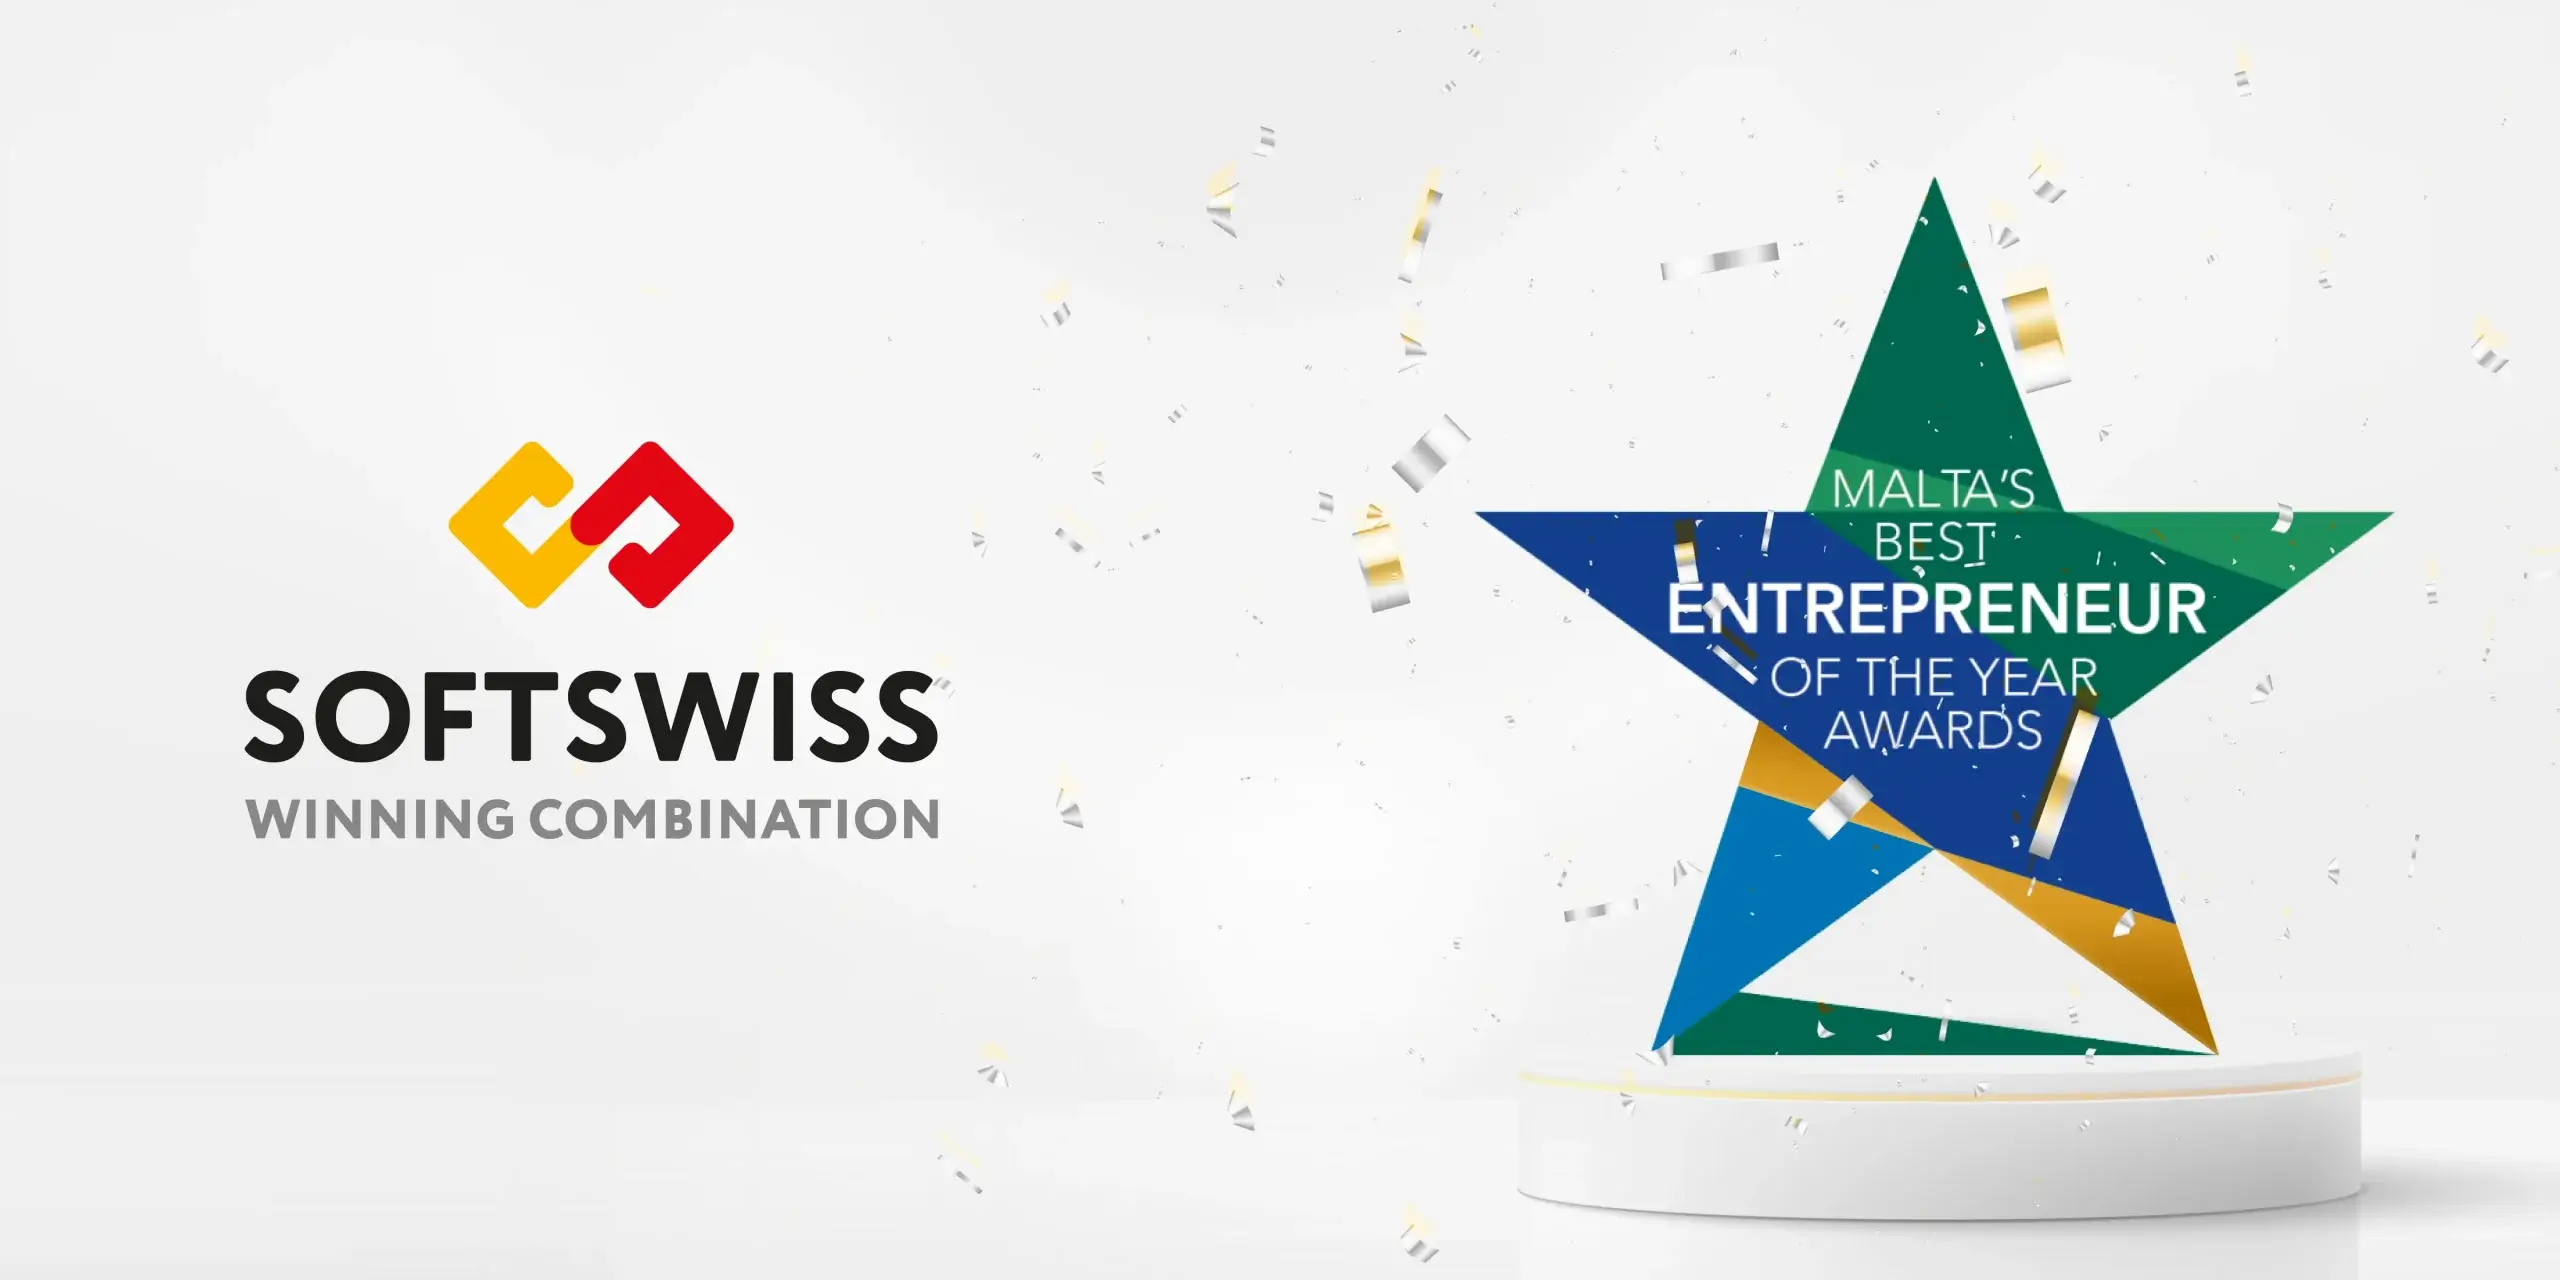 SOFTSWISS Triumphs at Malta’s Best Entrepreneur of the Year Awards 2023